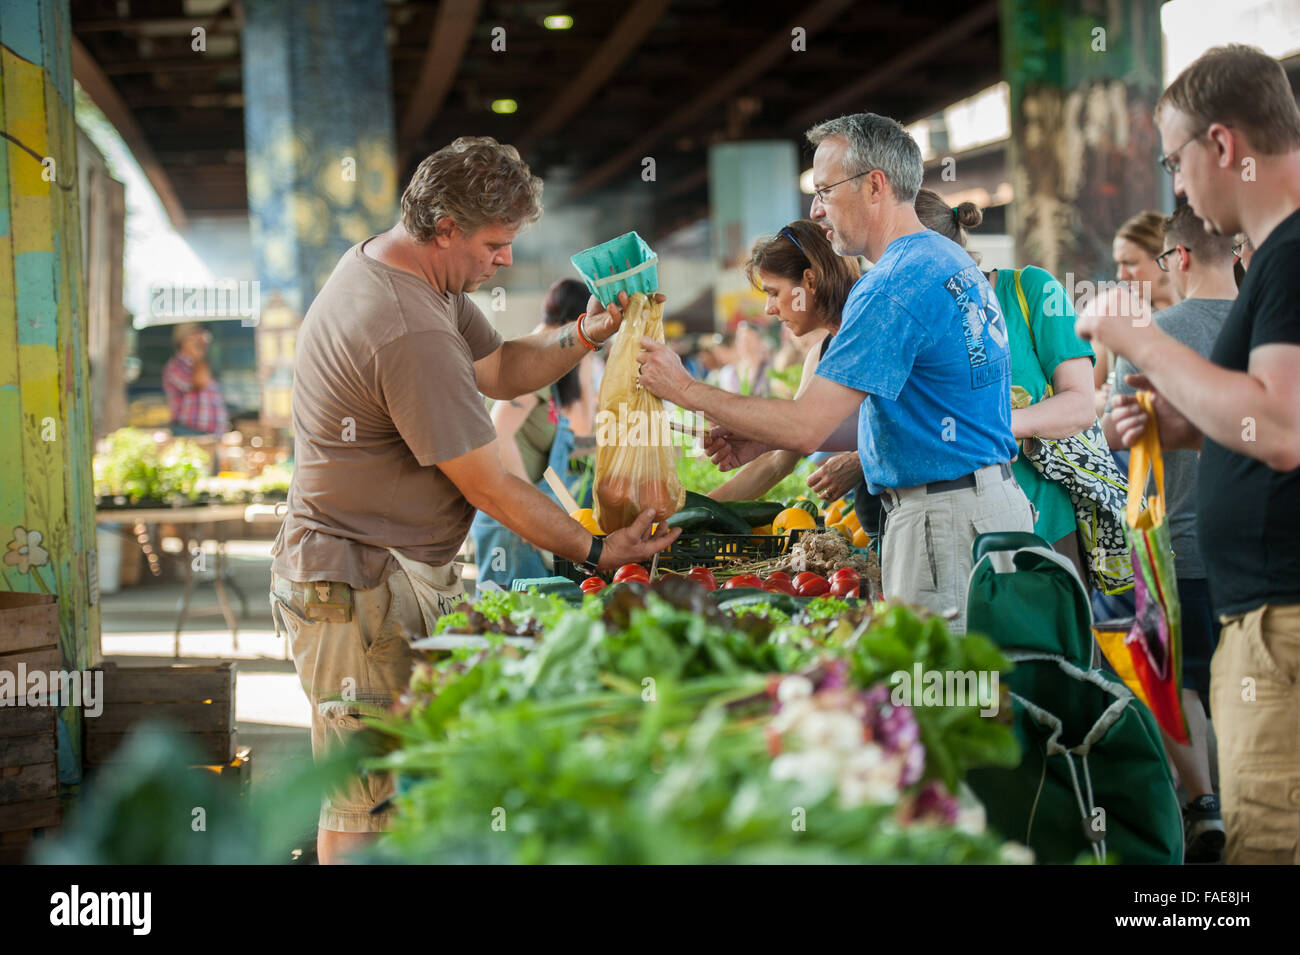 People buying produce at a local farmers market Stock Photo